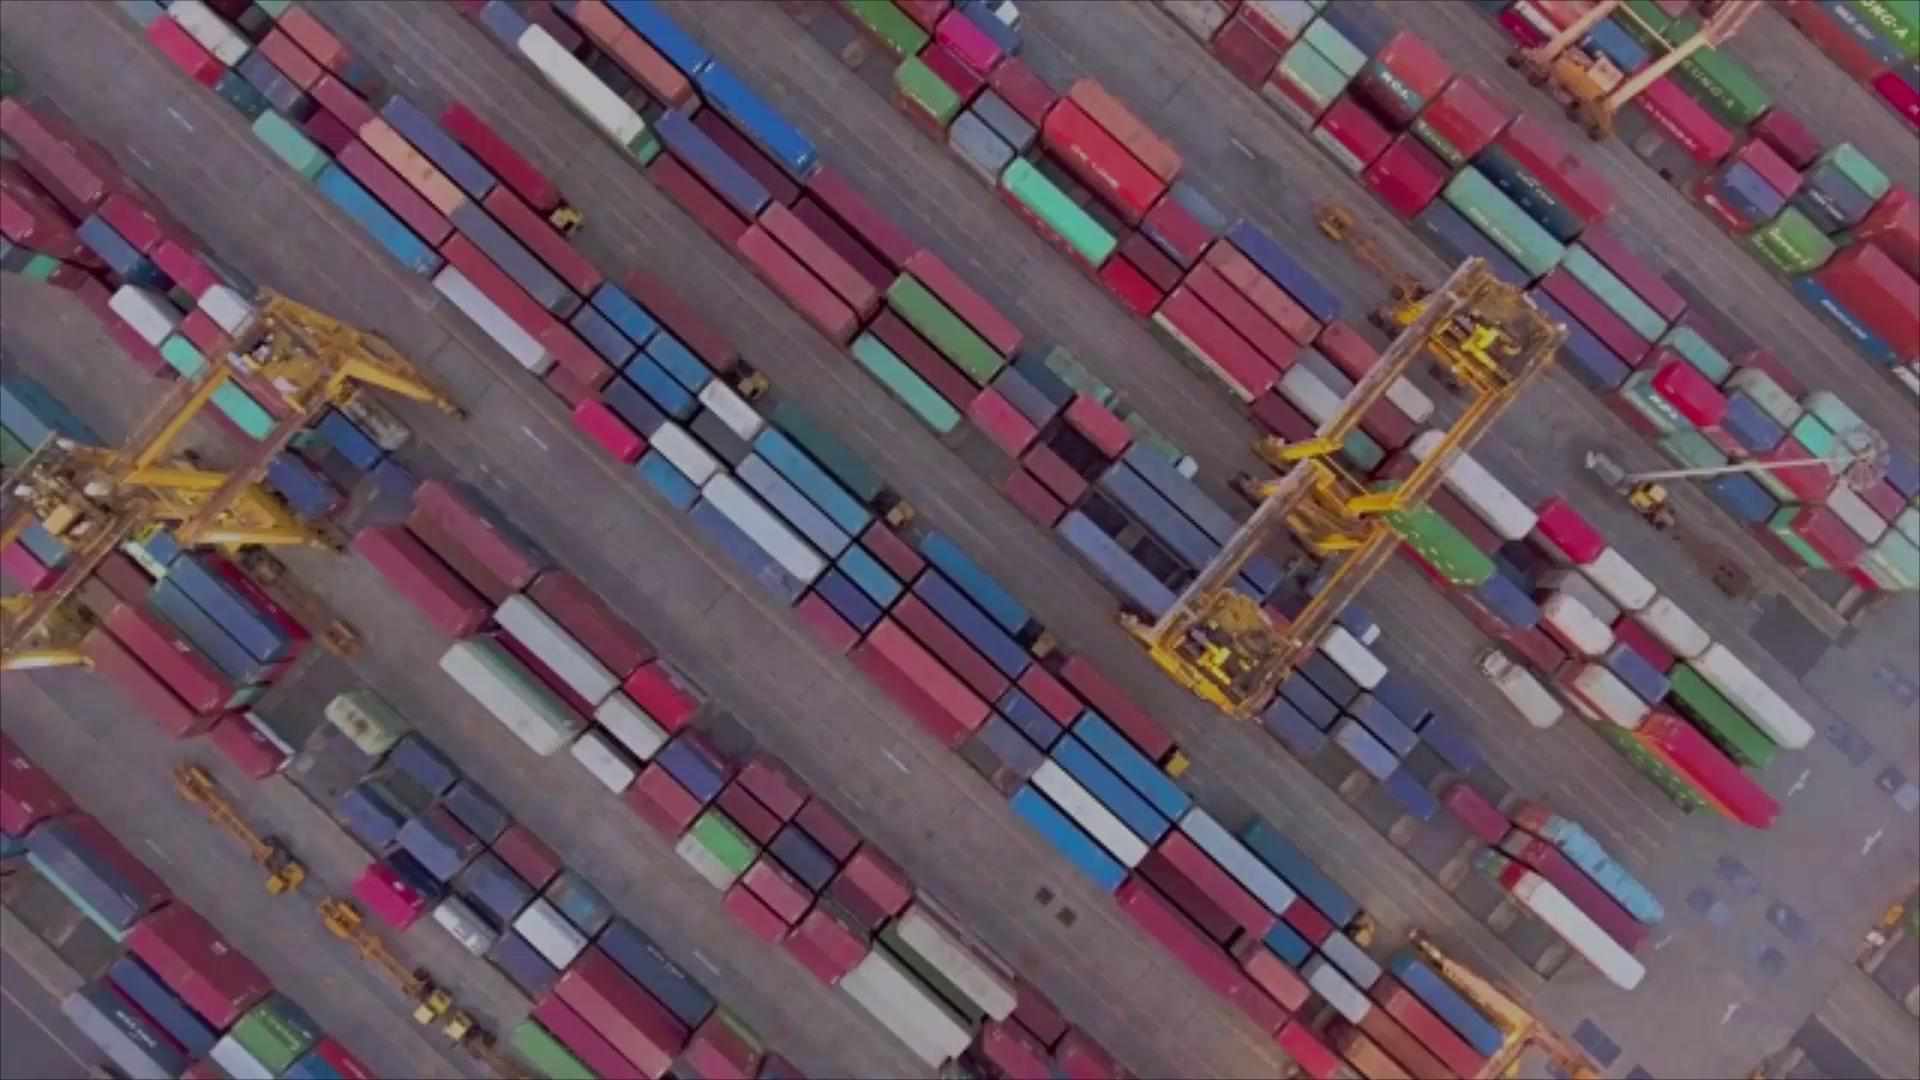 Overhead shot of shipping containers in a shipyard